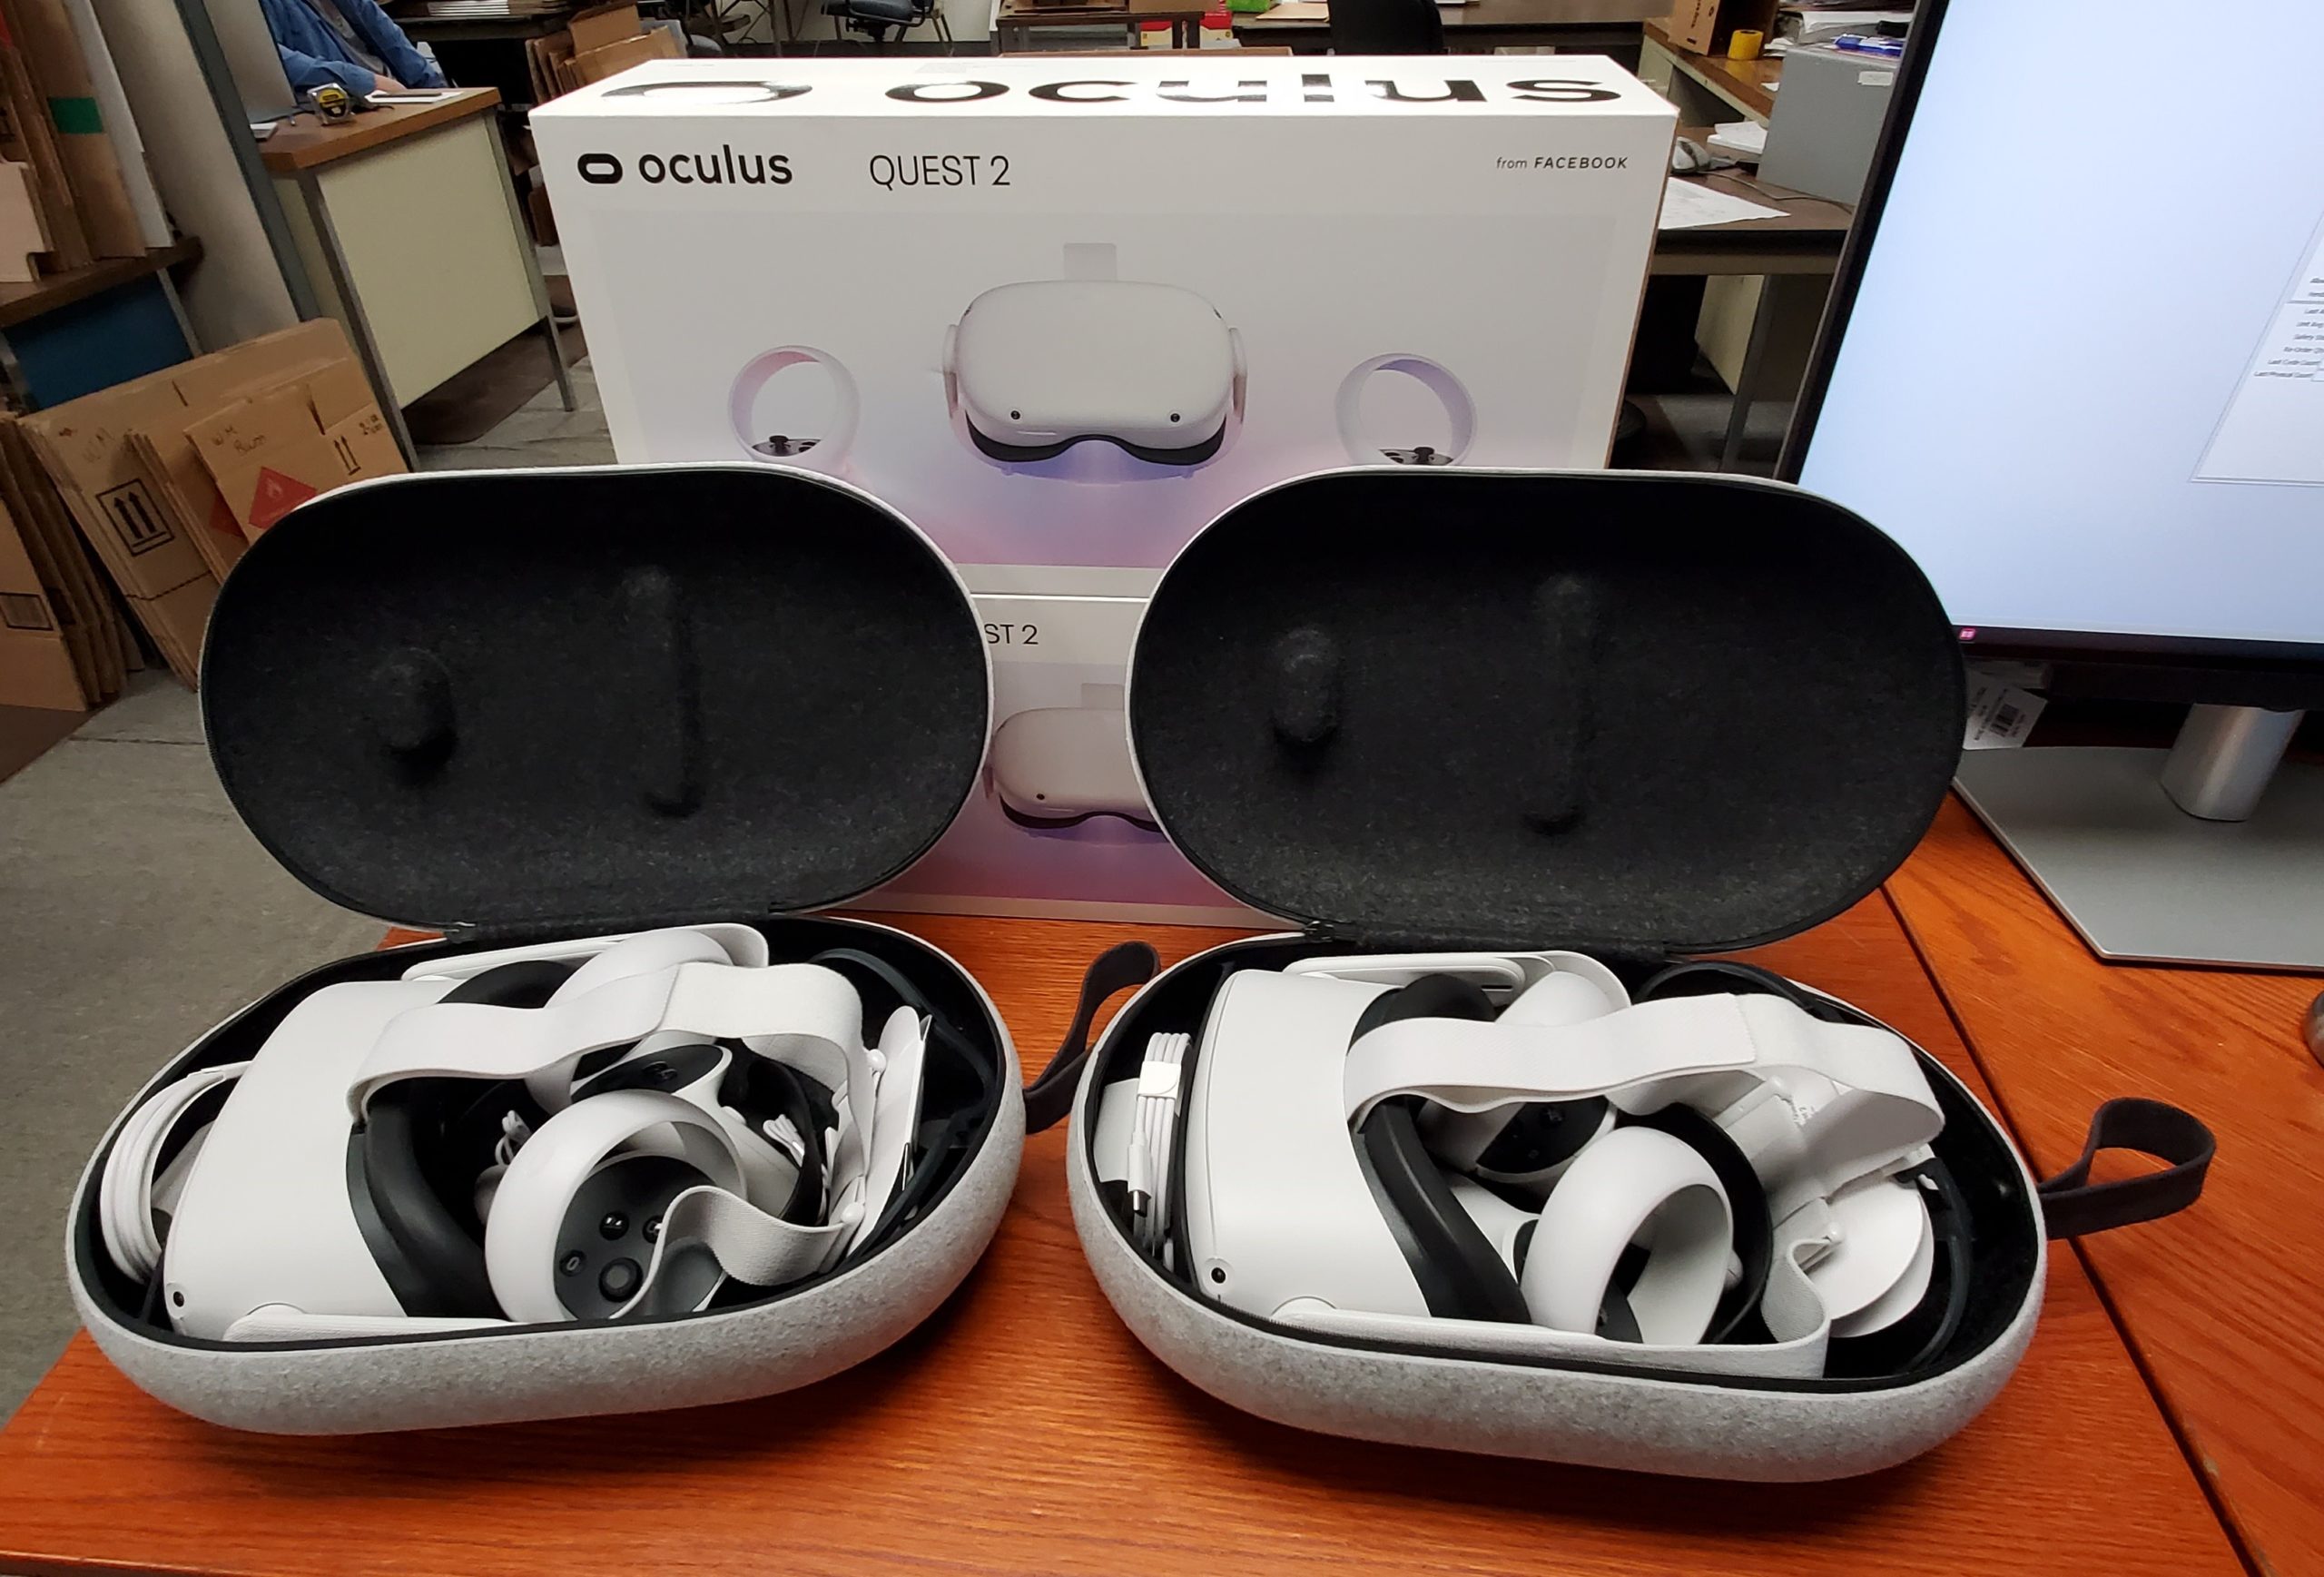 Oculus Quest 2 units sitting open, displayed in front of a product box in Wayne Automation offices for use in a virtual machine demonstration.